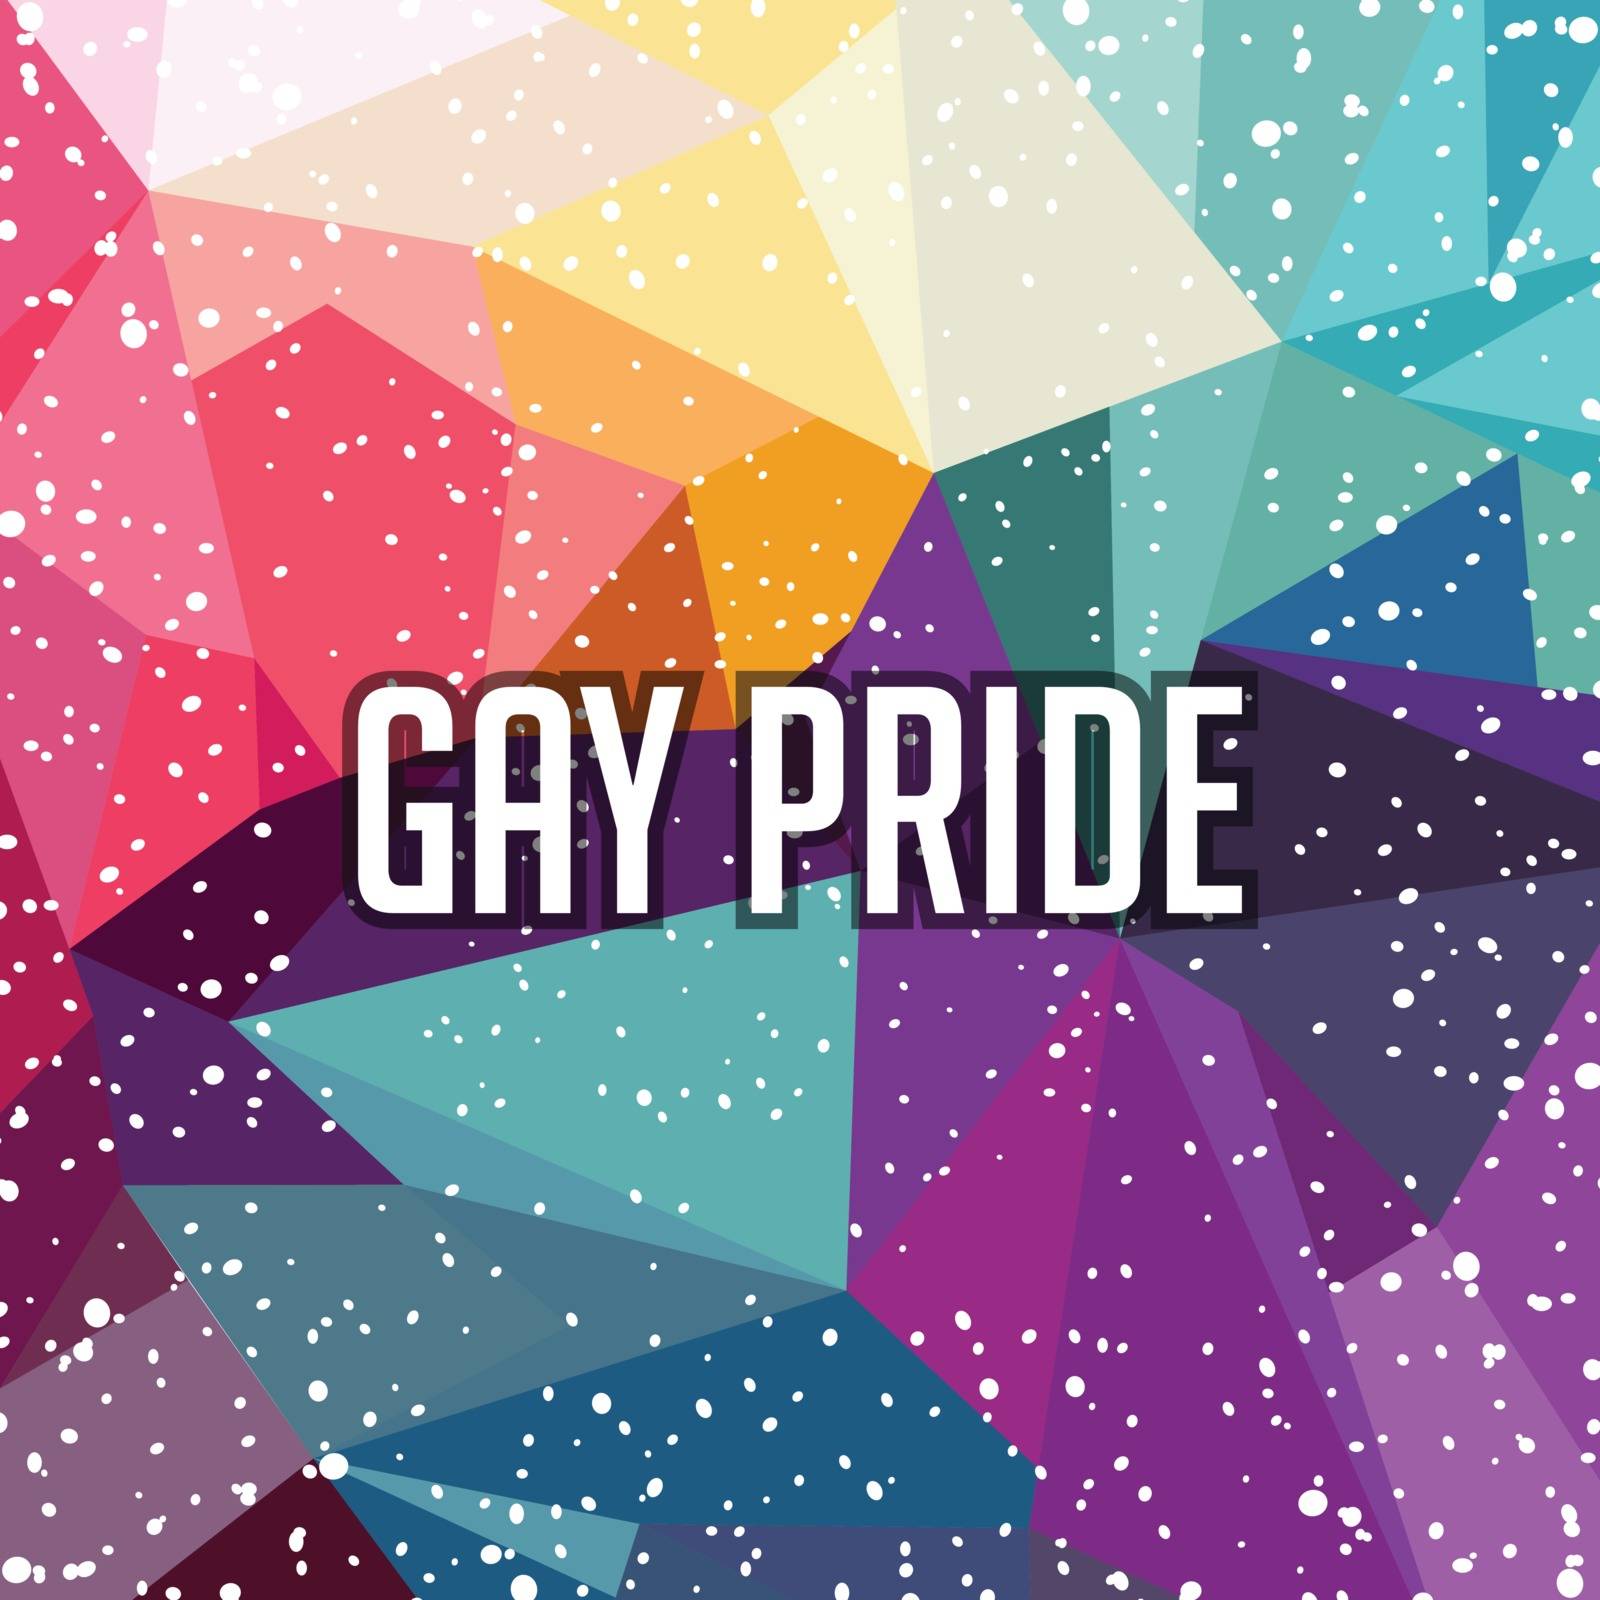 gay pride campaign freedom human rights vector art